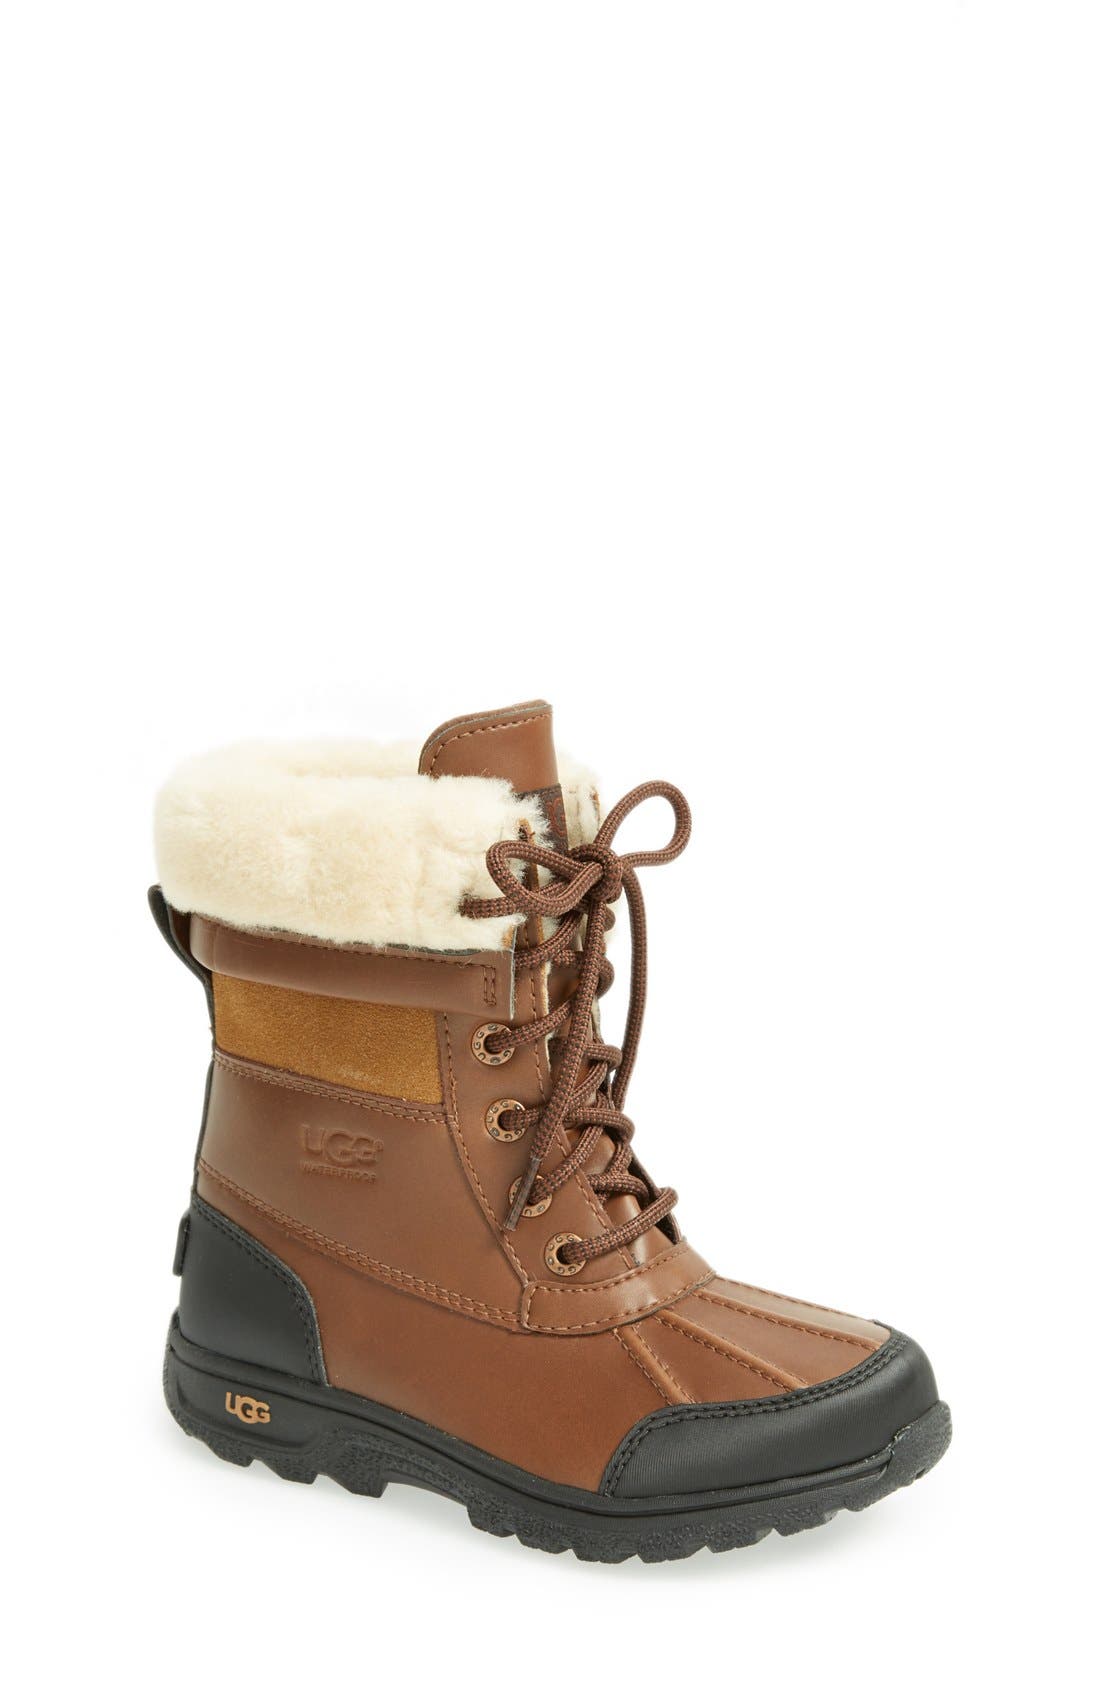 butte uggs womens